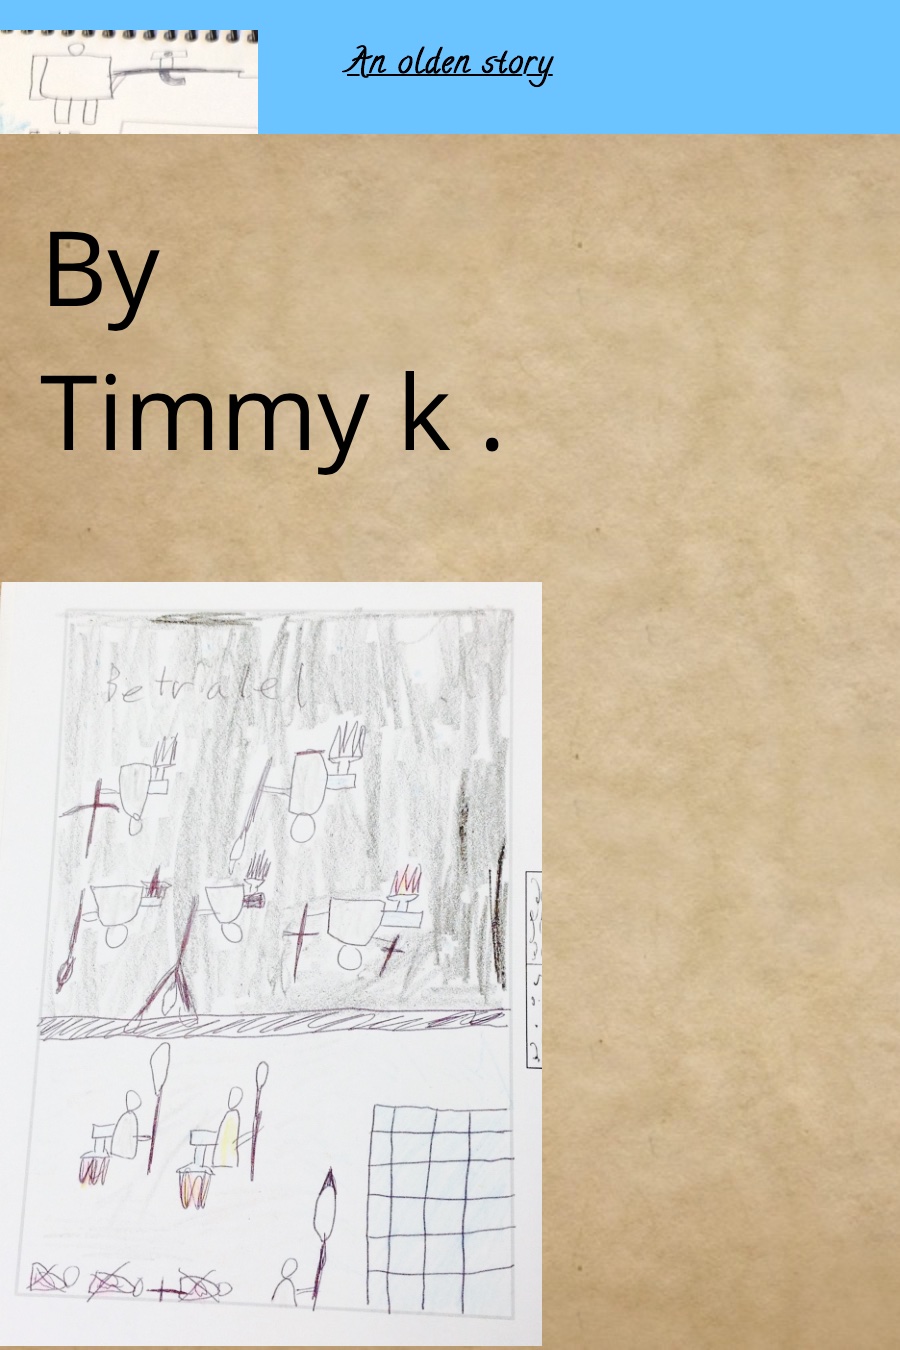 An Olden Story by Timmy K